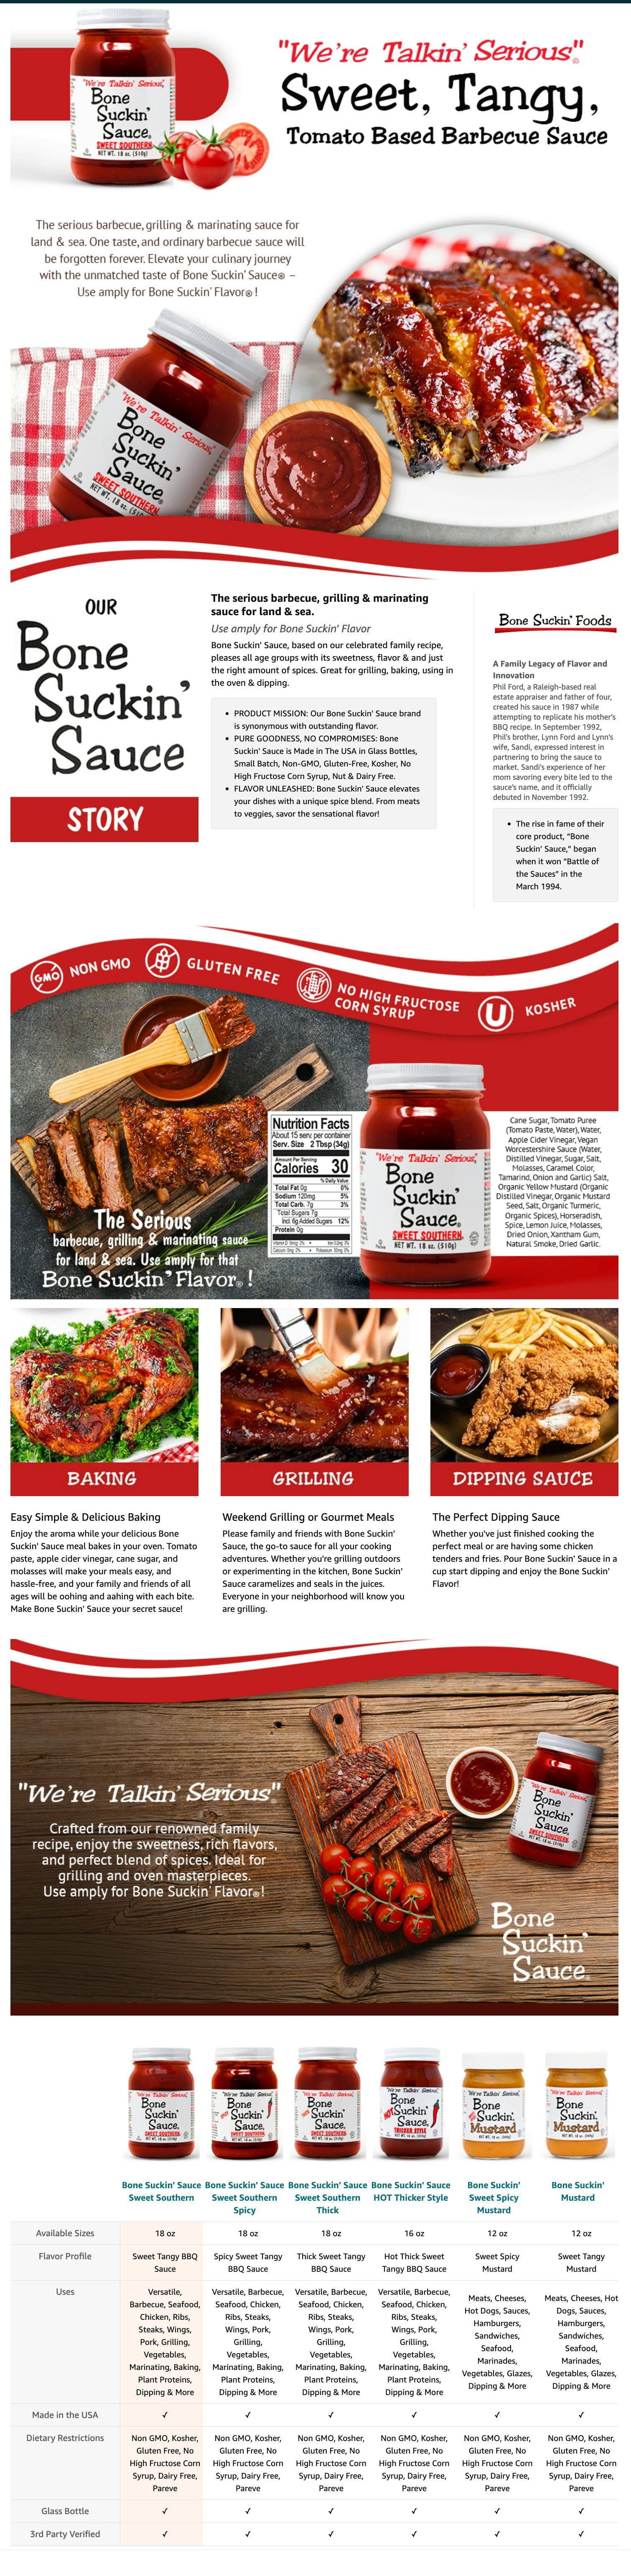 Bone Suckin' Sauce®, Sweet Southern® 18 oz., Based on our award winning family recipe, our Bone Suckin’ Sauce®, Sweet Southern® is guaranteed to please with its sweetness, flavor & just the right amount of spices. Great for grilling & using in the oven. Use amply for that Bone Suckin’ Flavor®!